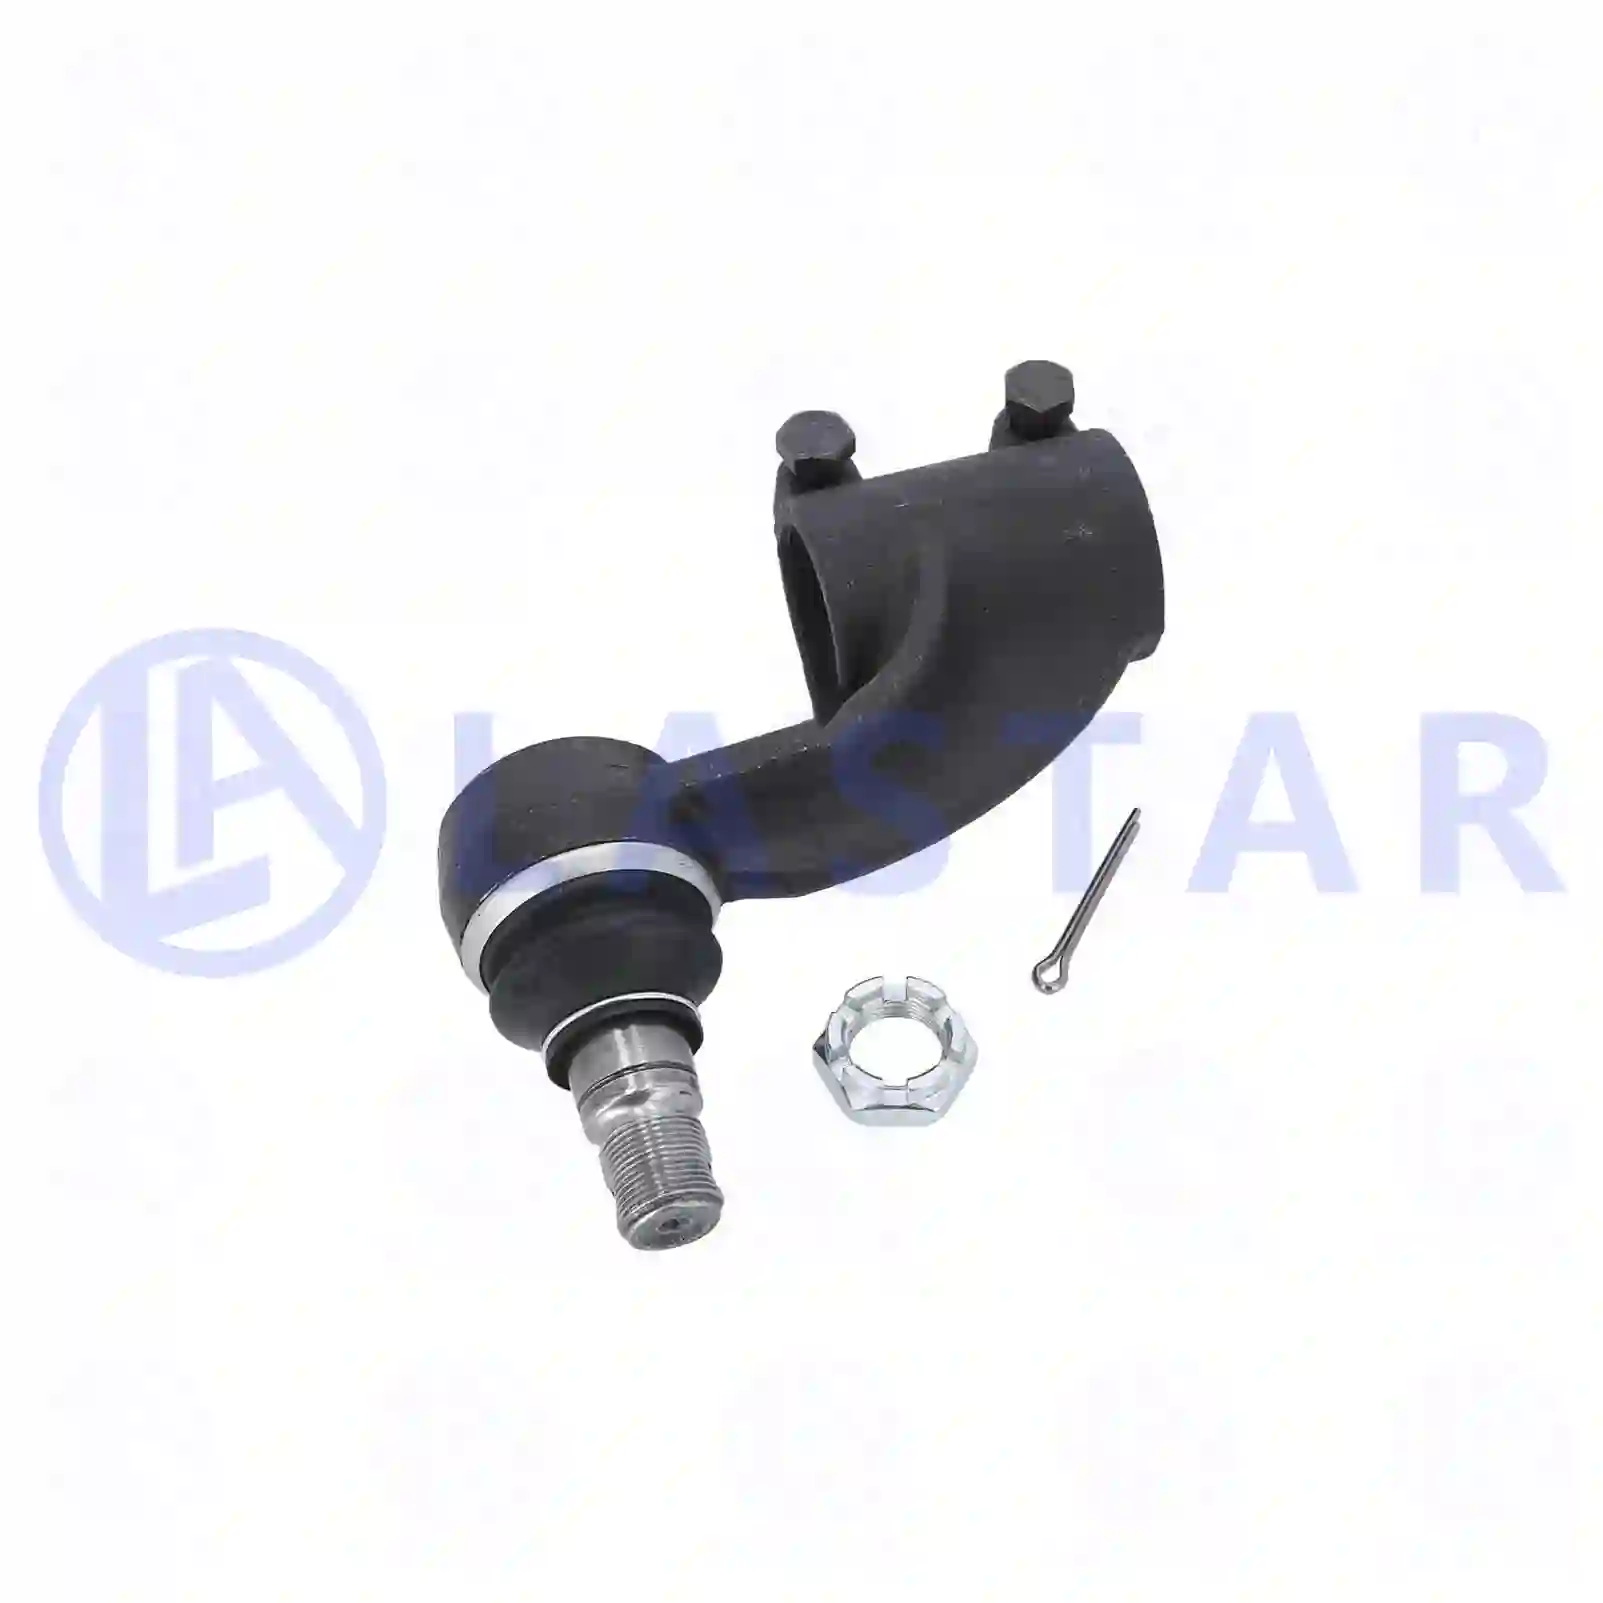 Ball joint, right hand thread, 77705625, 310980, 539413, ZG40362-0008 ||  77705625 Lastar Spare Part | Truck Spare Parts, Auotomotive Spare Parts Ball joint, right hand thread, 77705625, 310980, 539413, ZG40362-0008 ||  77705625 Lastar Spare Part | Truck Spare Parts, Auotomotive Spare Parts